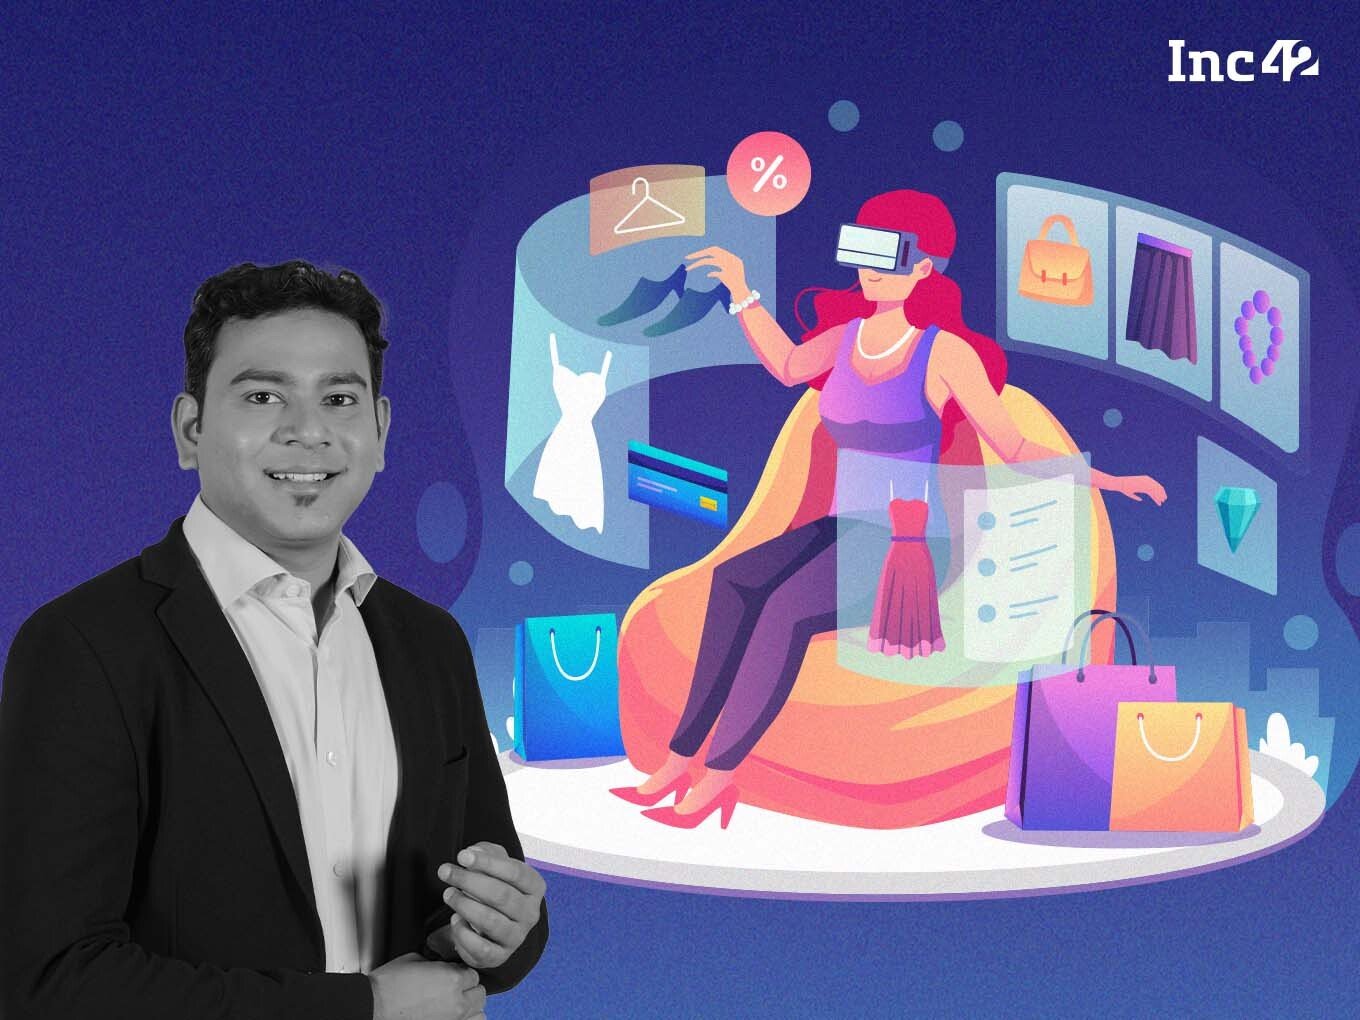 Metaverse Set To Be A Game-Changer For Ecommerce But There’s Time: Meesho’s Sanjeev Barnwal